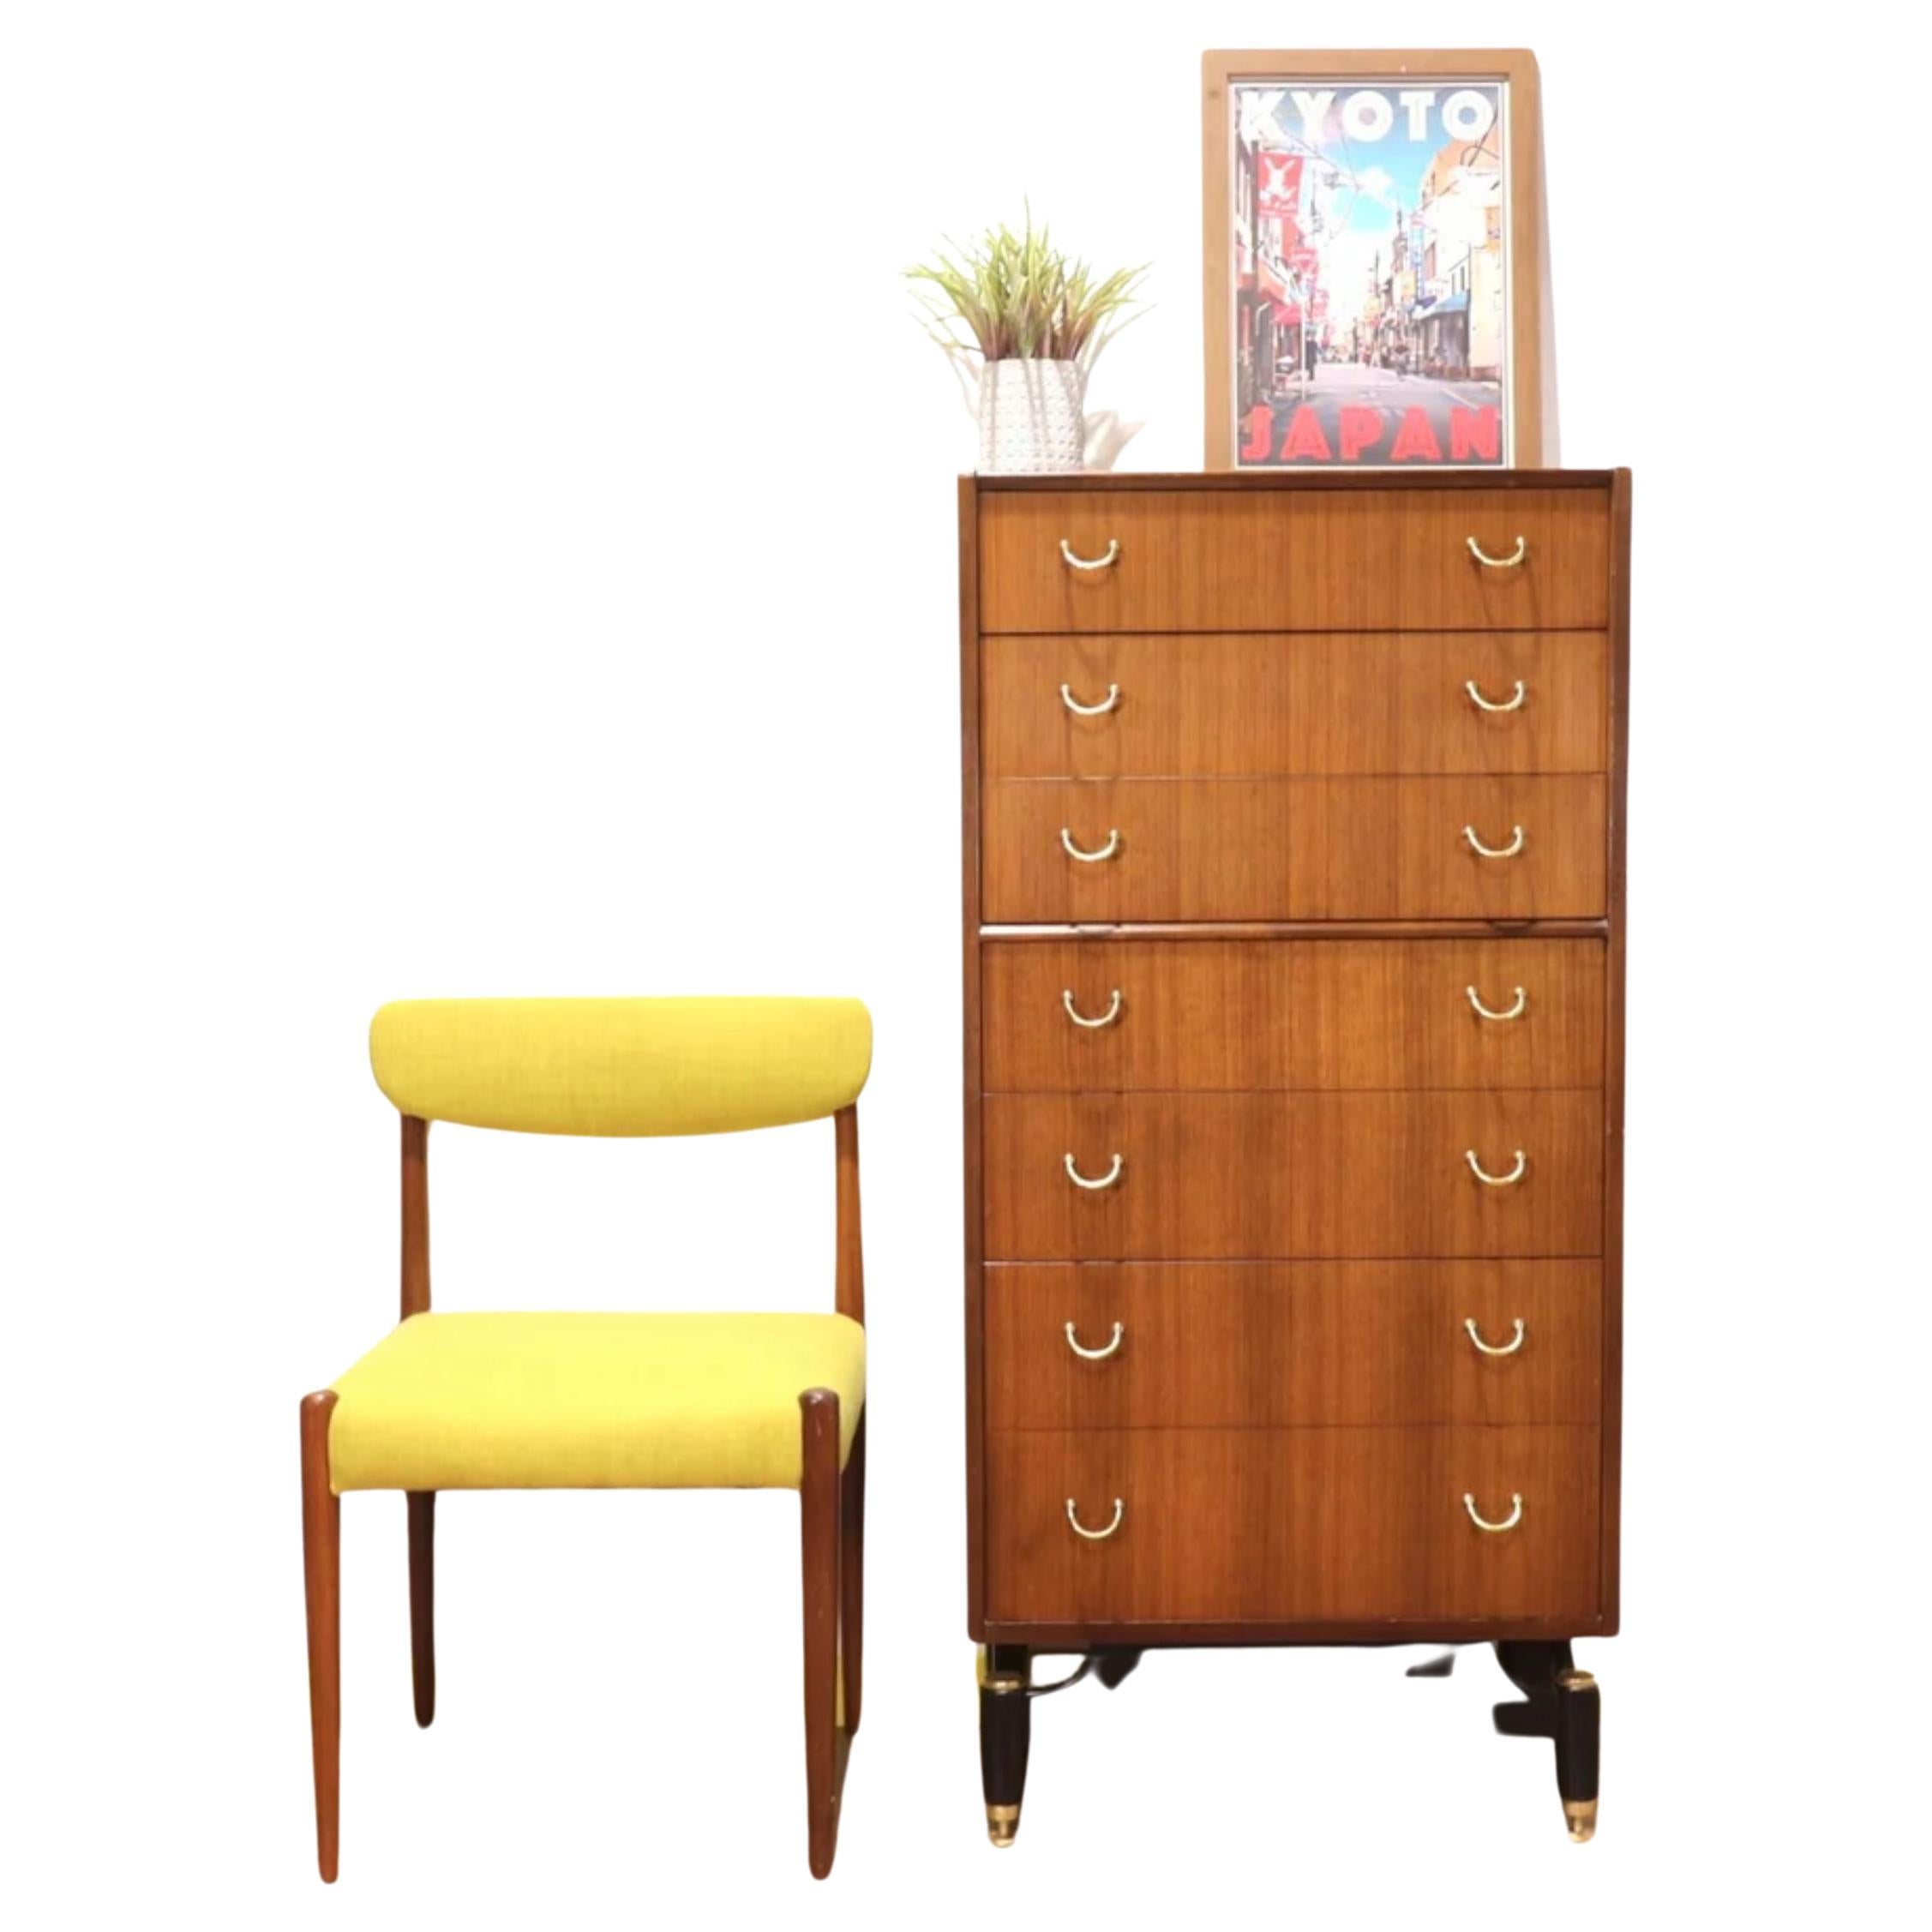 A stunning mid-century Italian style Tola Librenza tallboy dresser of 7 drawers By E Gomme (G Plan) on black plinth / legs with polished brass caps, adjustable brass riser feet & ergonomic curved brass handles.
Dimension:

W 24 D 16 H